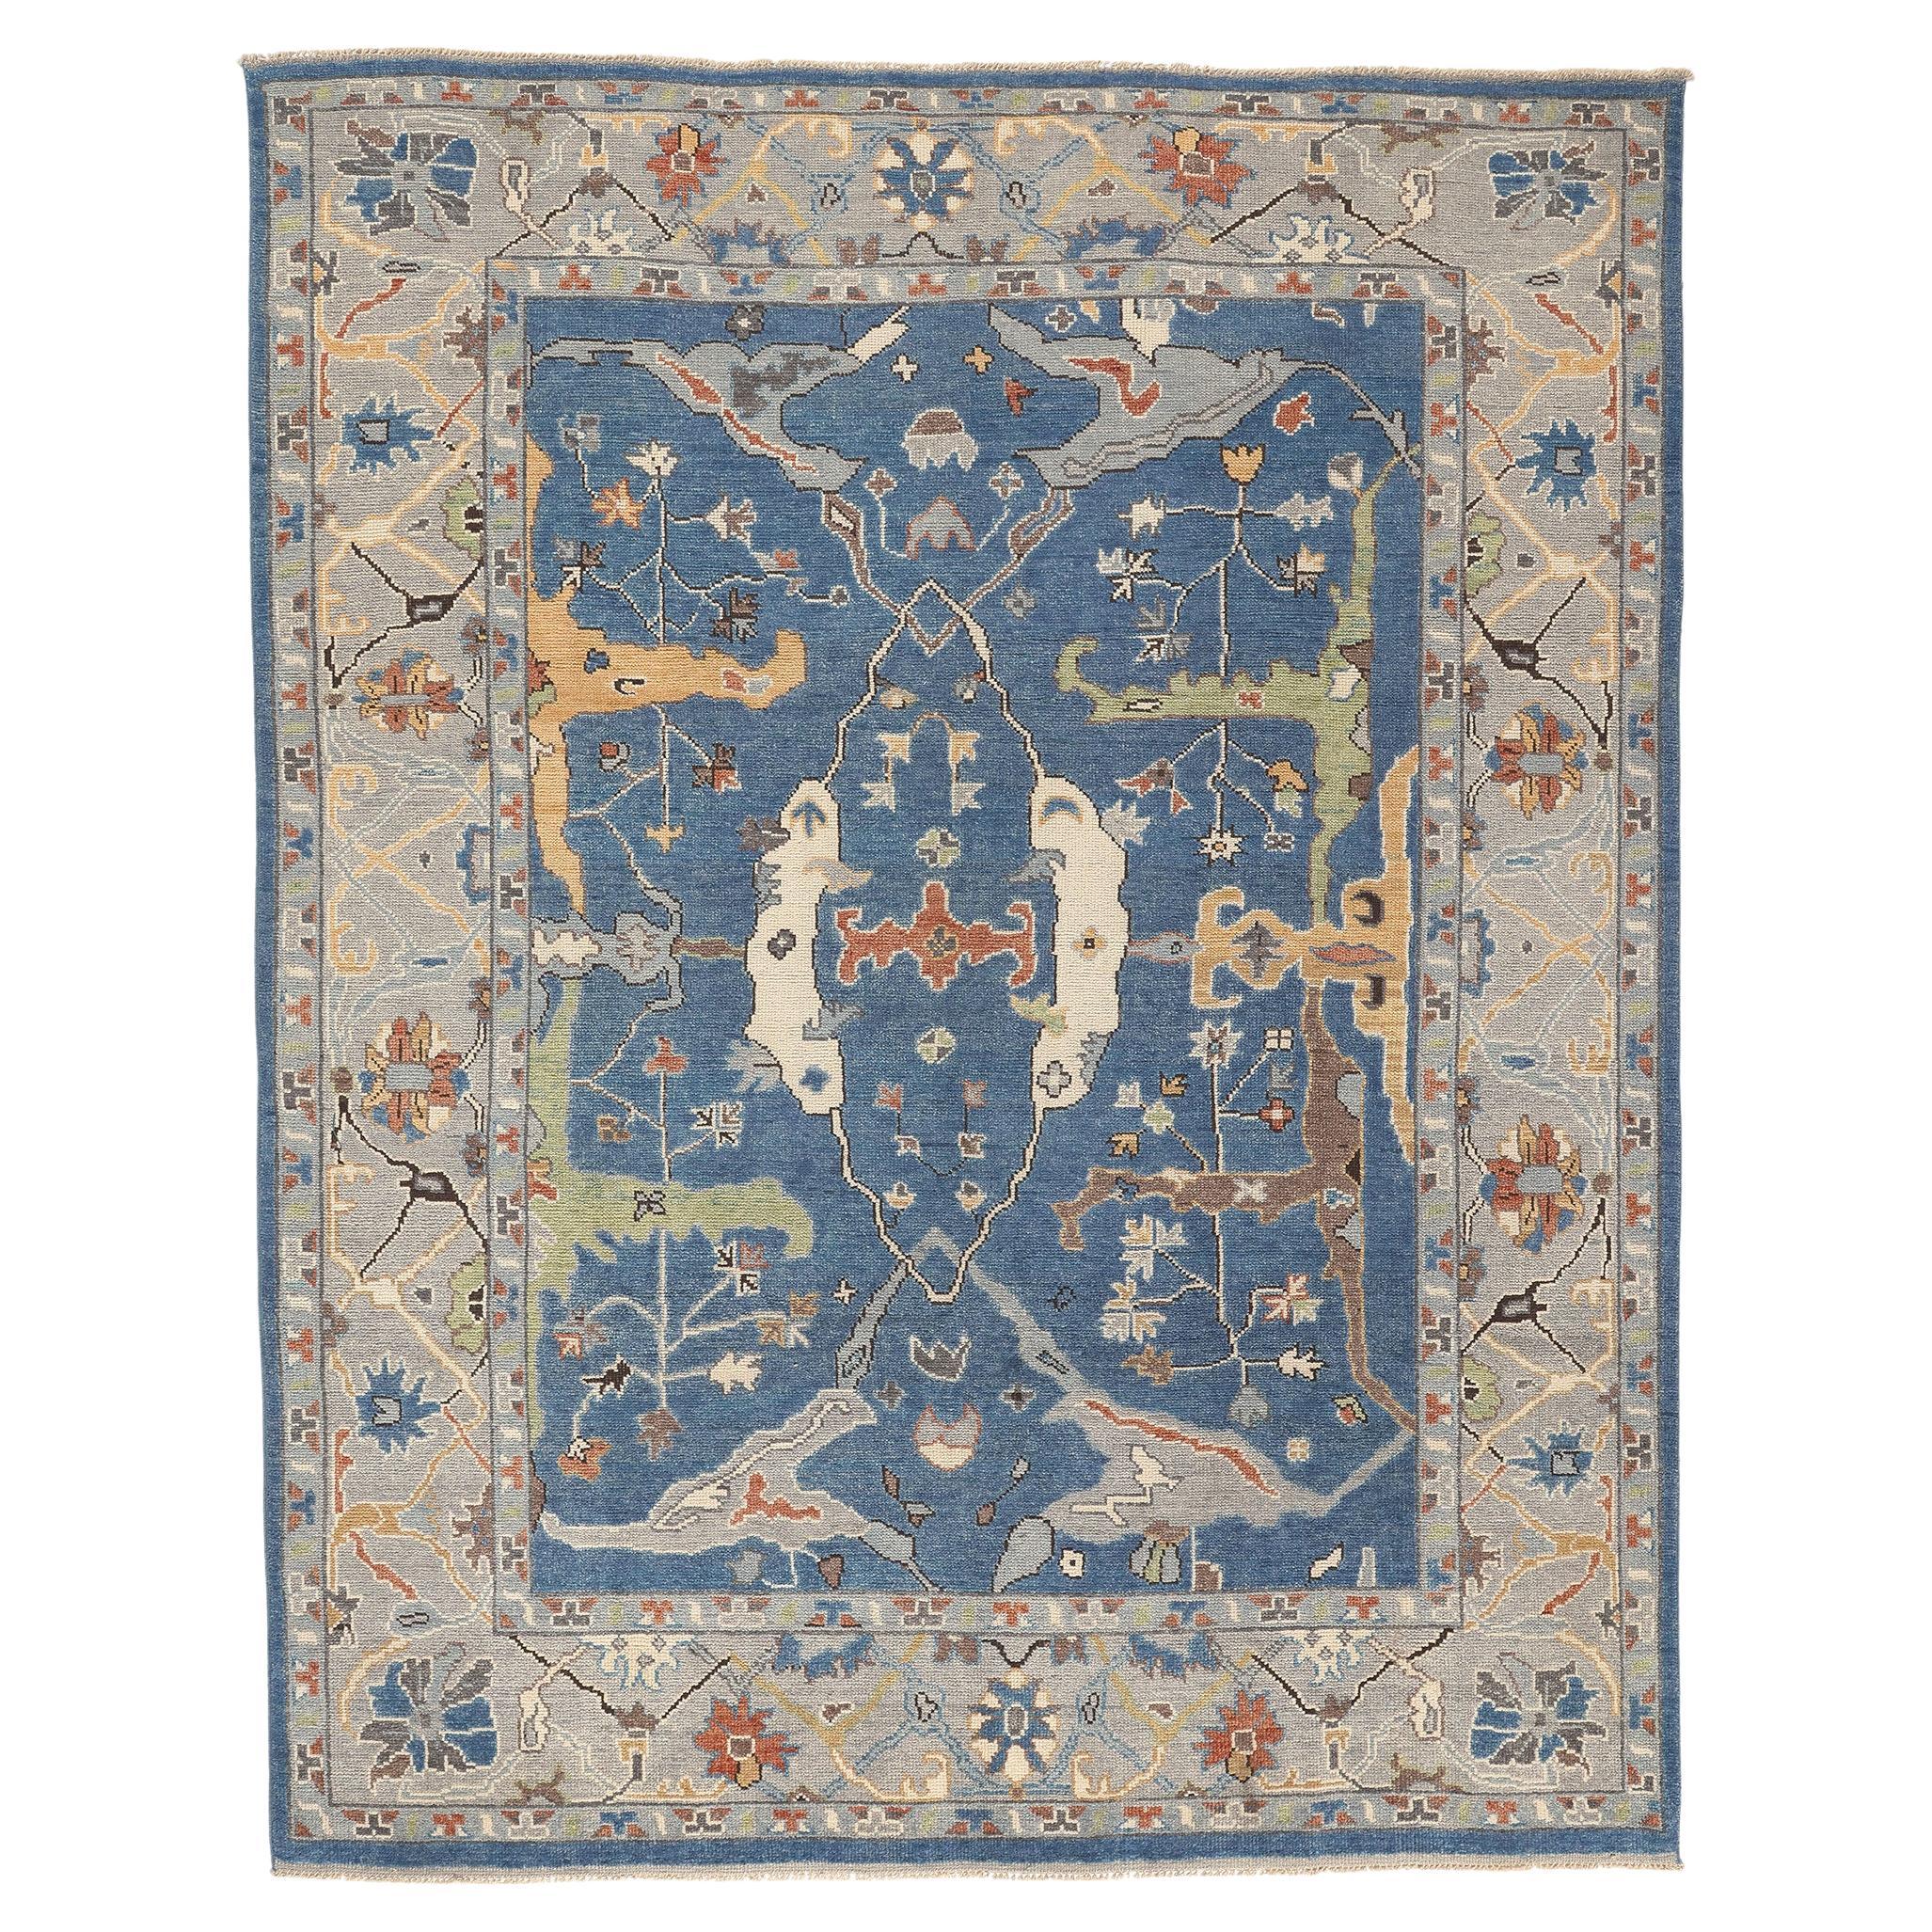 New Colorful Blue Oushak Rug with Modern Style